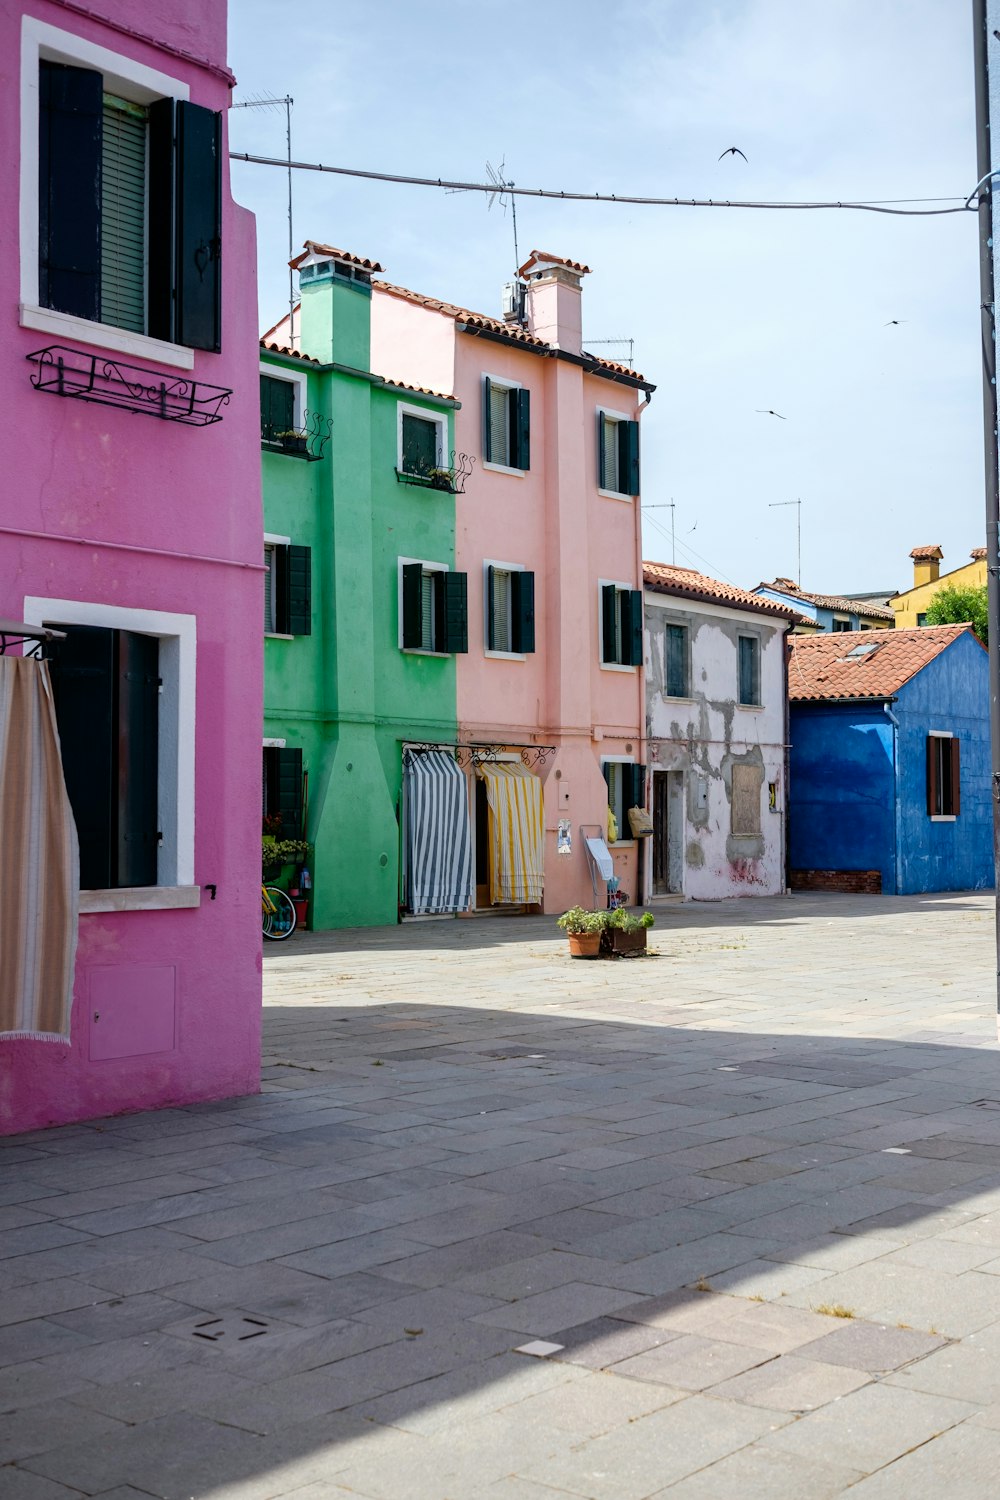 a row of colorful buildings with laundry hanging out to dry